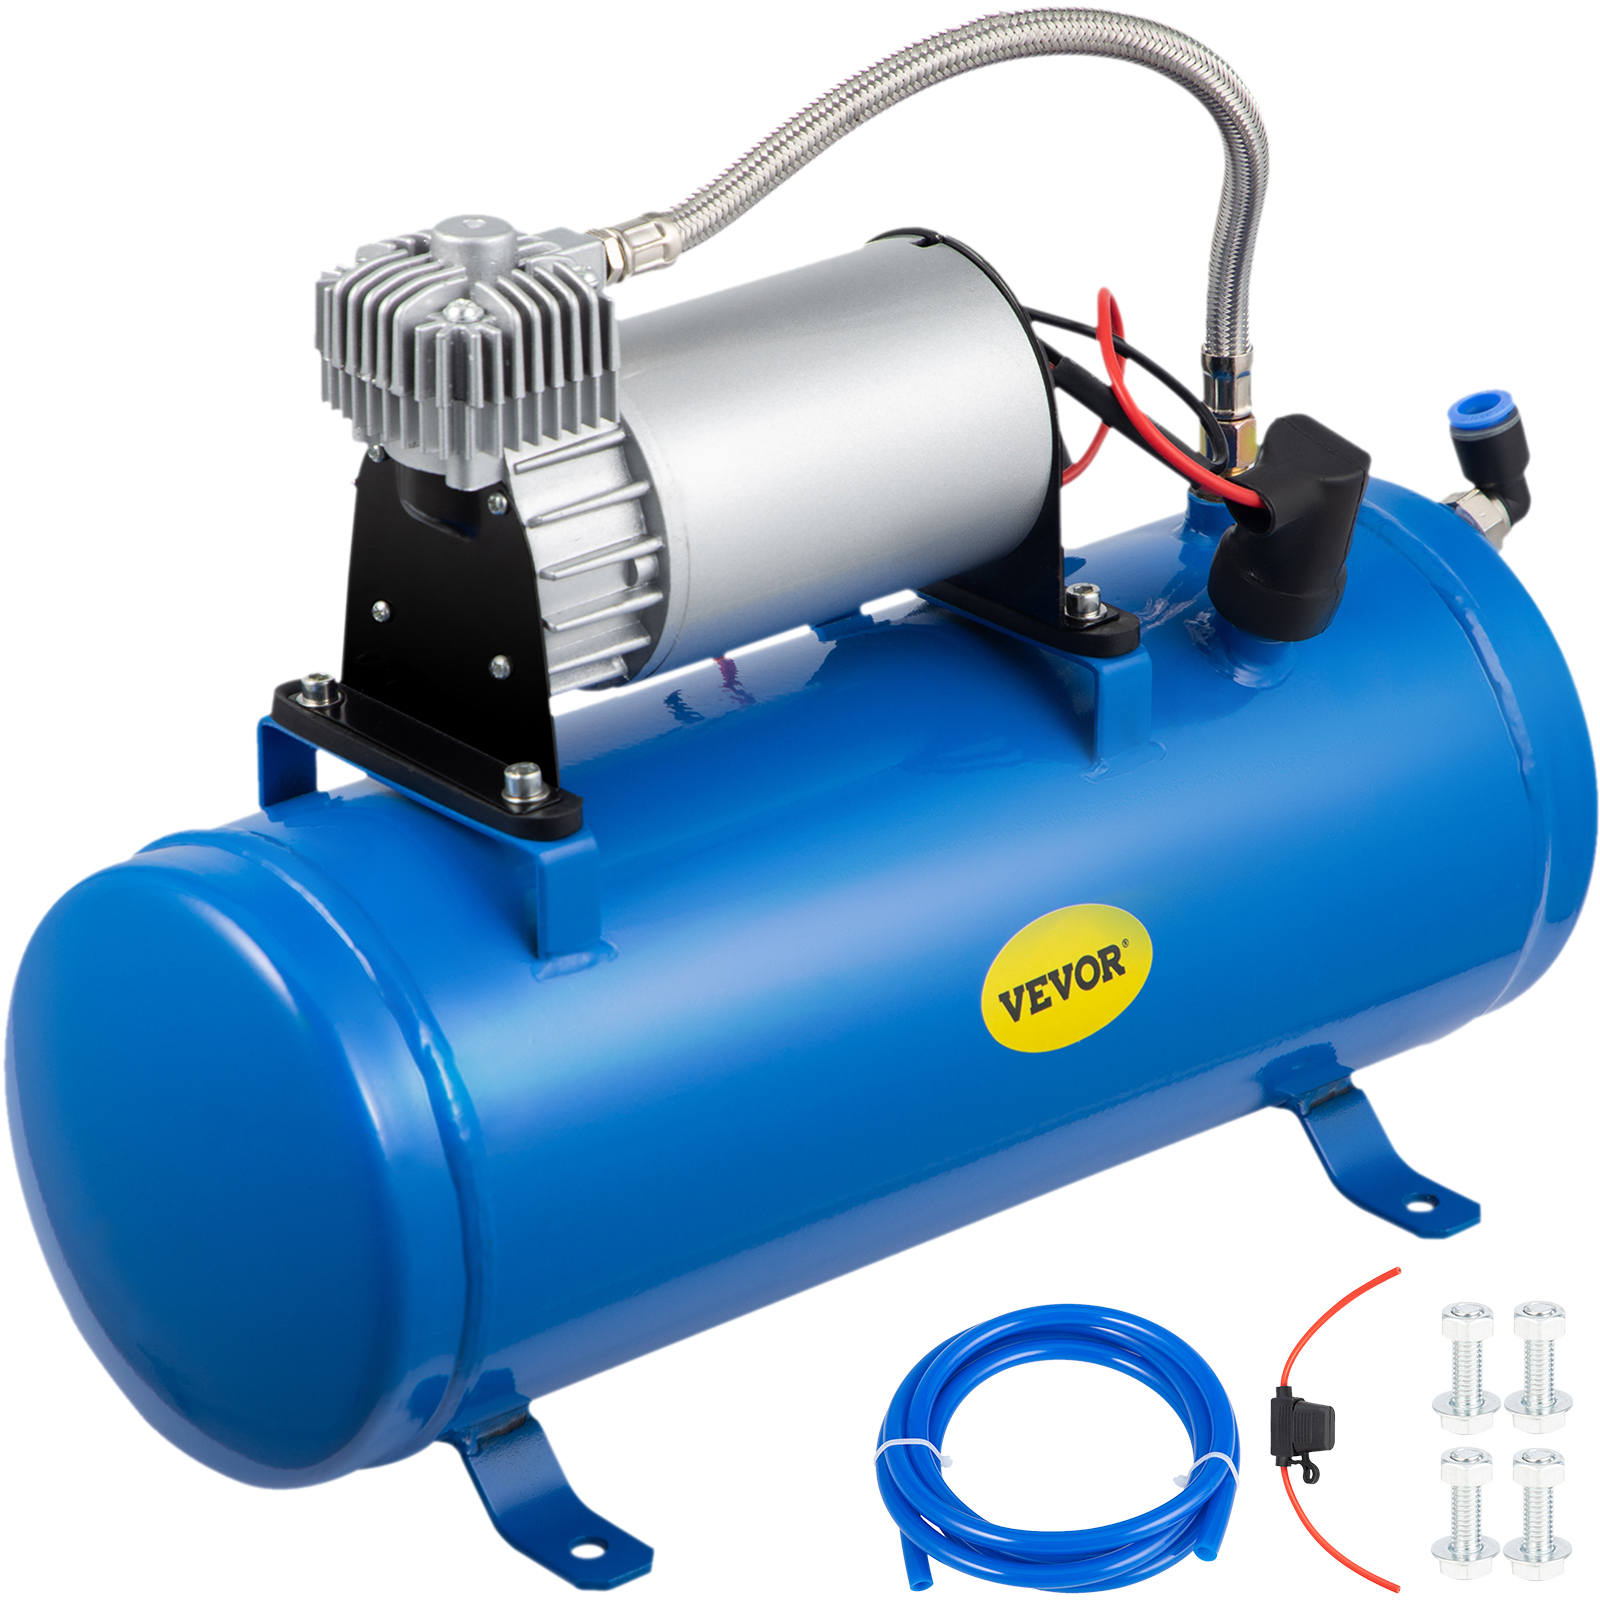 Tuningsworld 12V 150 PSI 6L Air Compressor air tank with Hoses fittings For Air Horns Train 